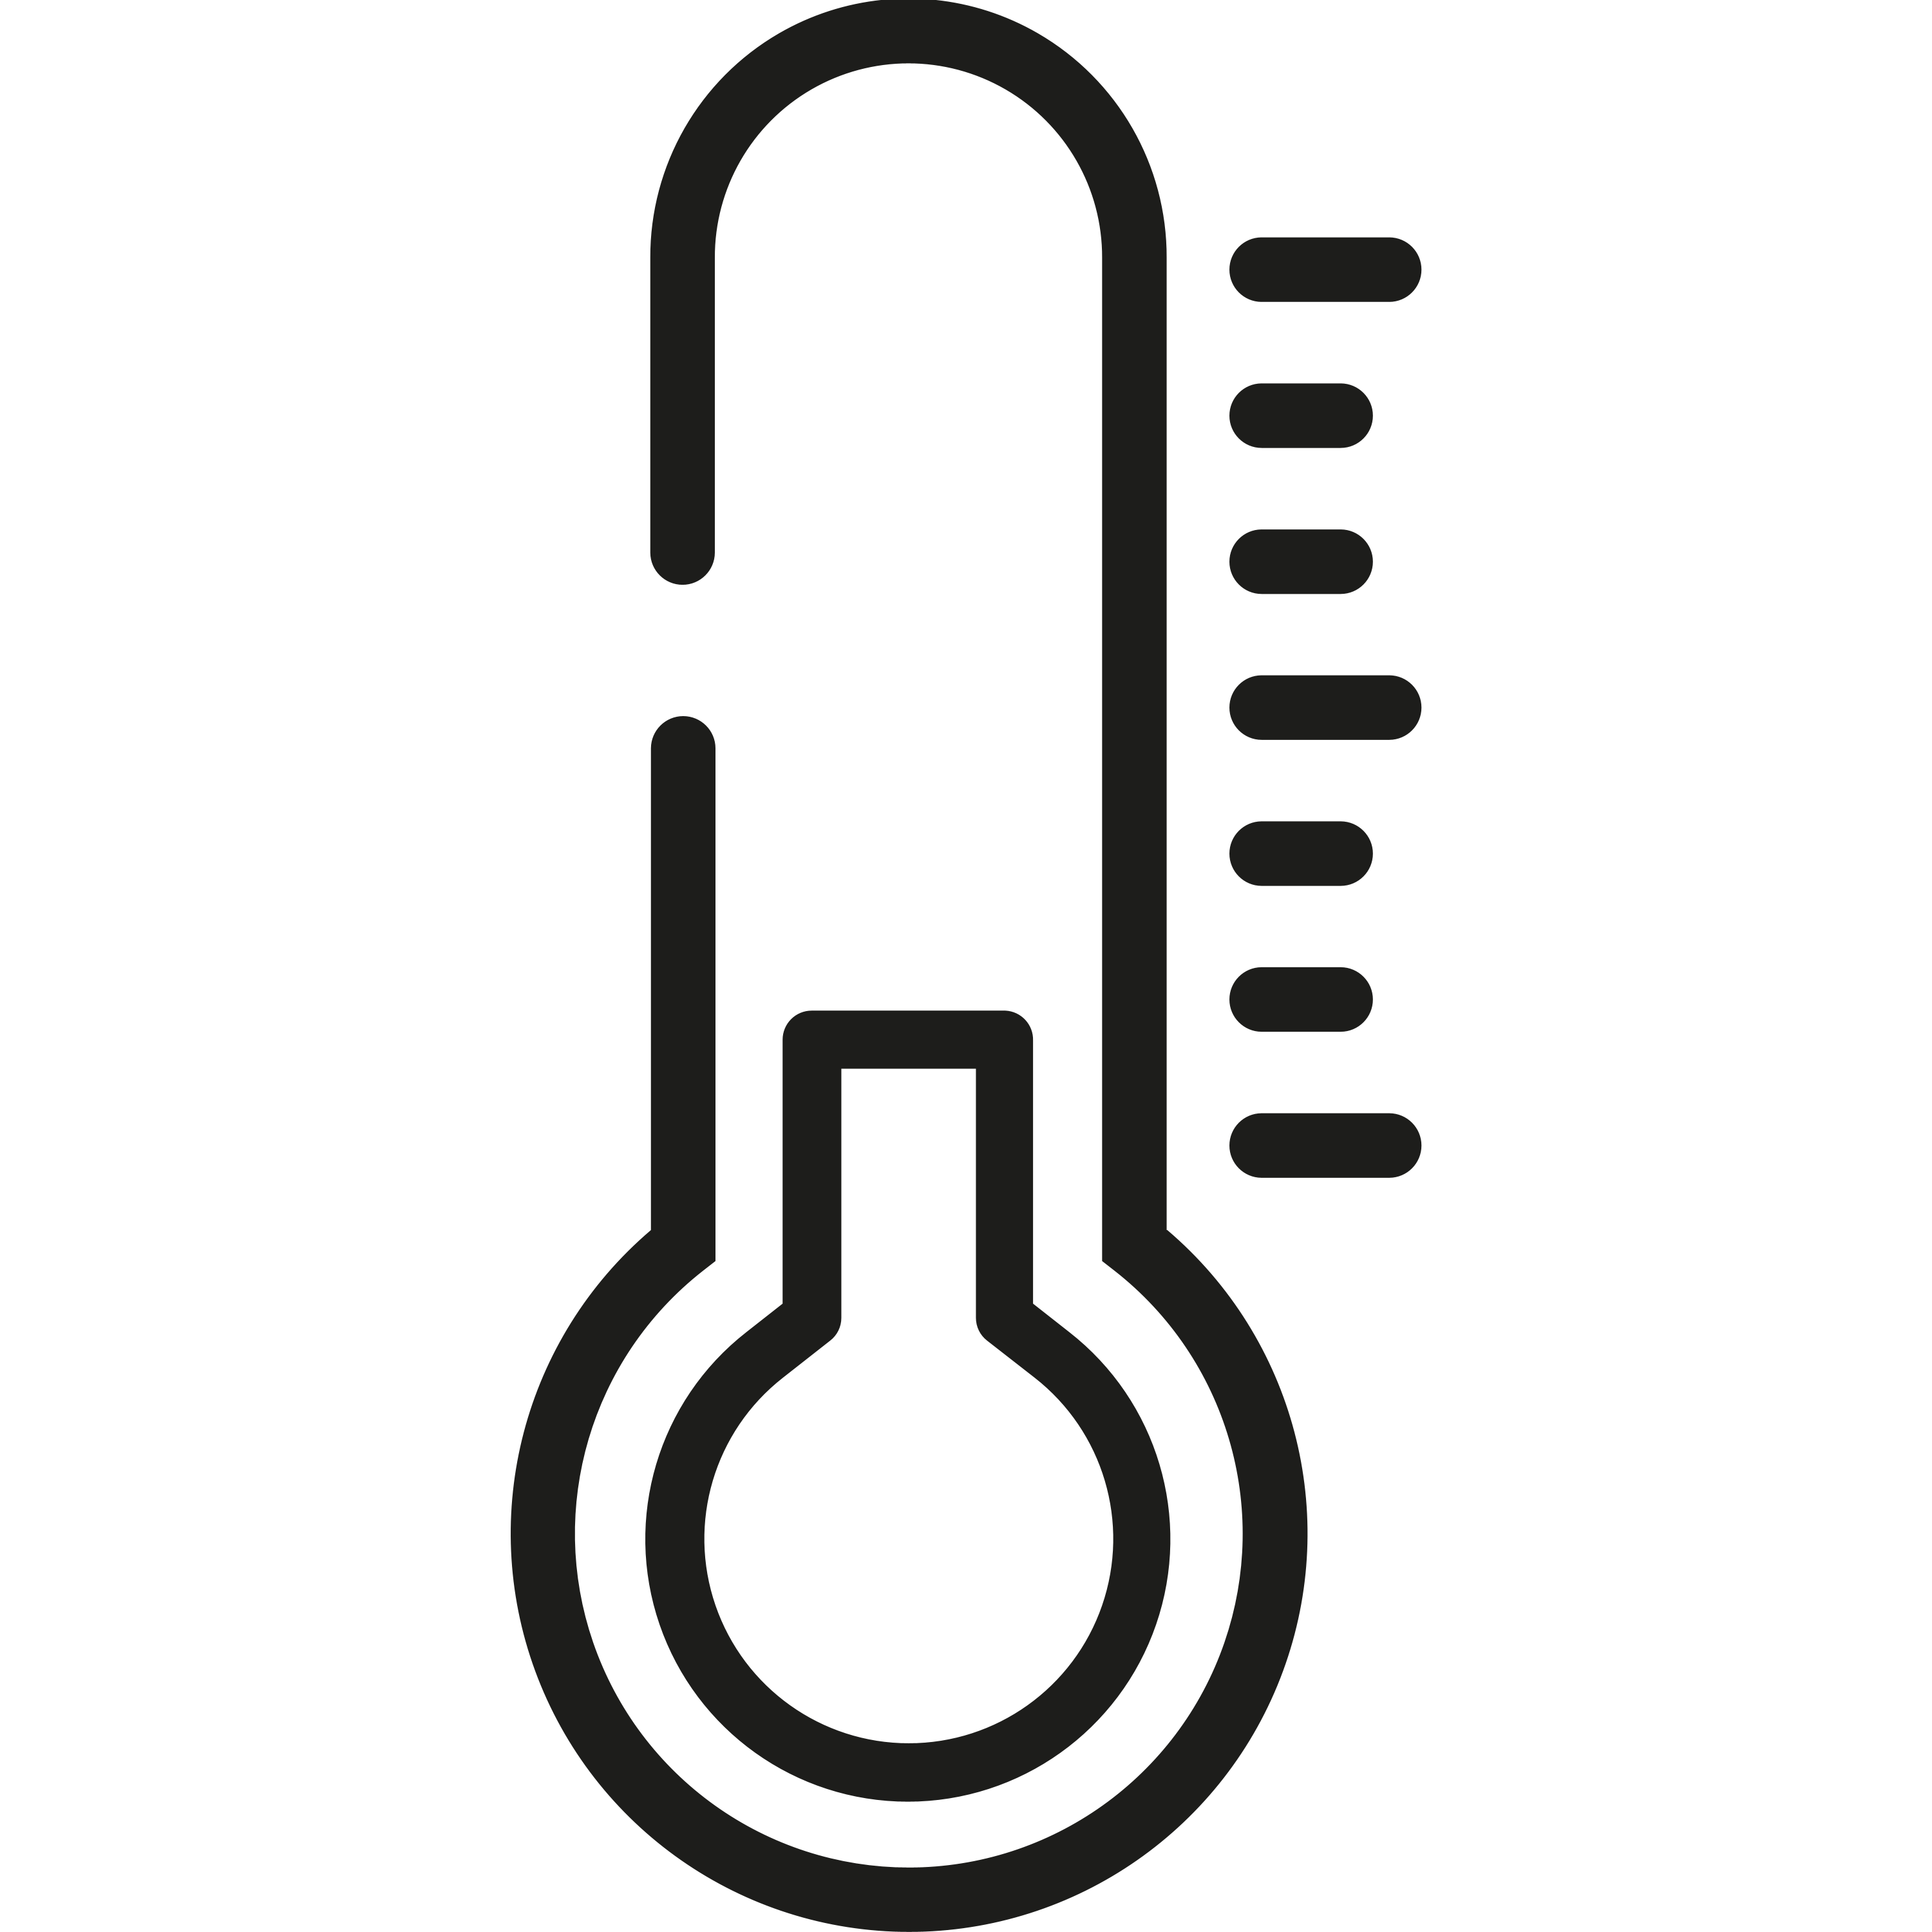 Clariant_Icon_Less Heating_Improved Isolation_Thermal_Thermometer_06-10-2020